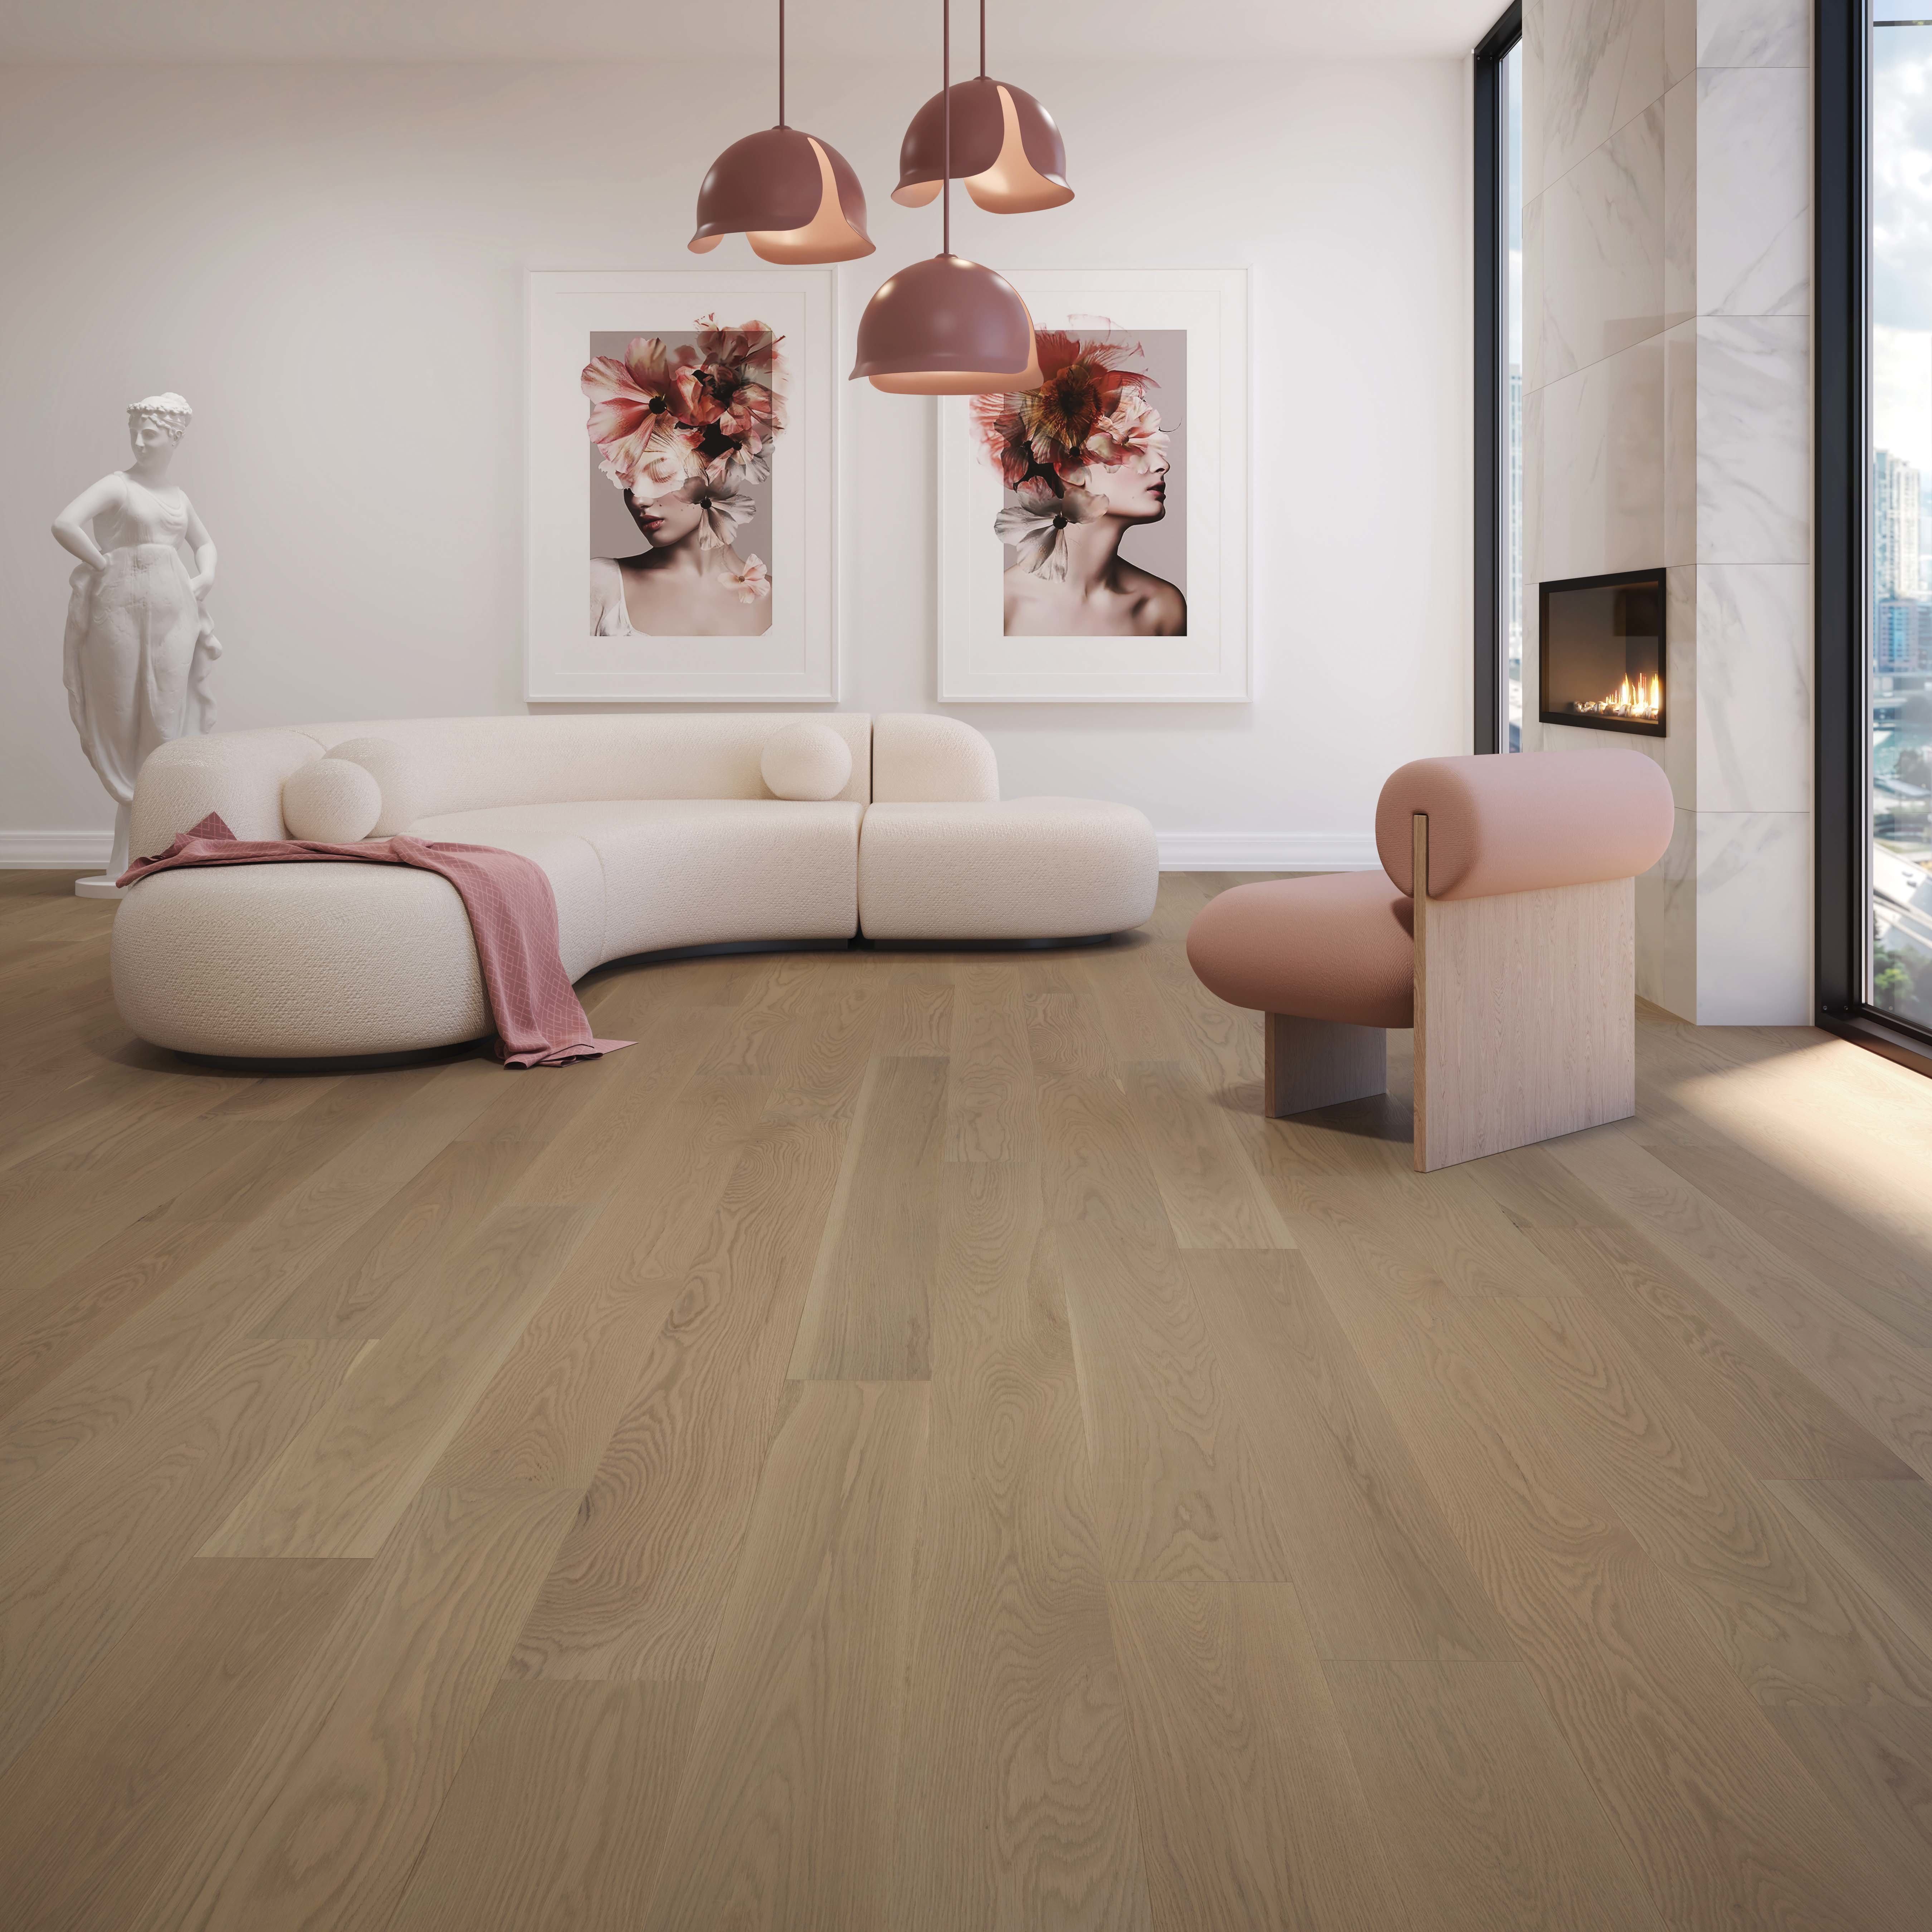 White Oak Maud Exclusive Brushed - Ambience image